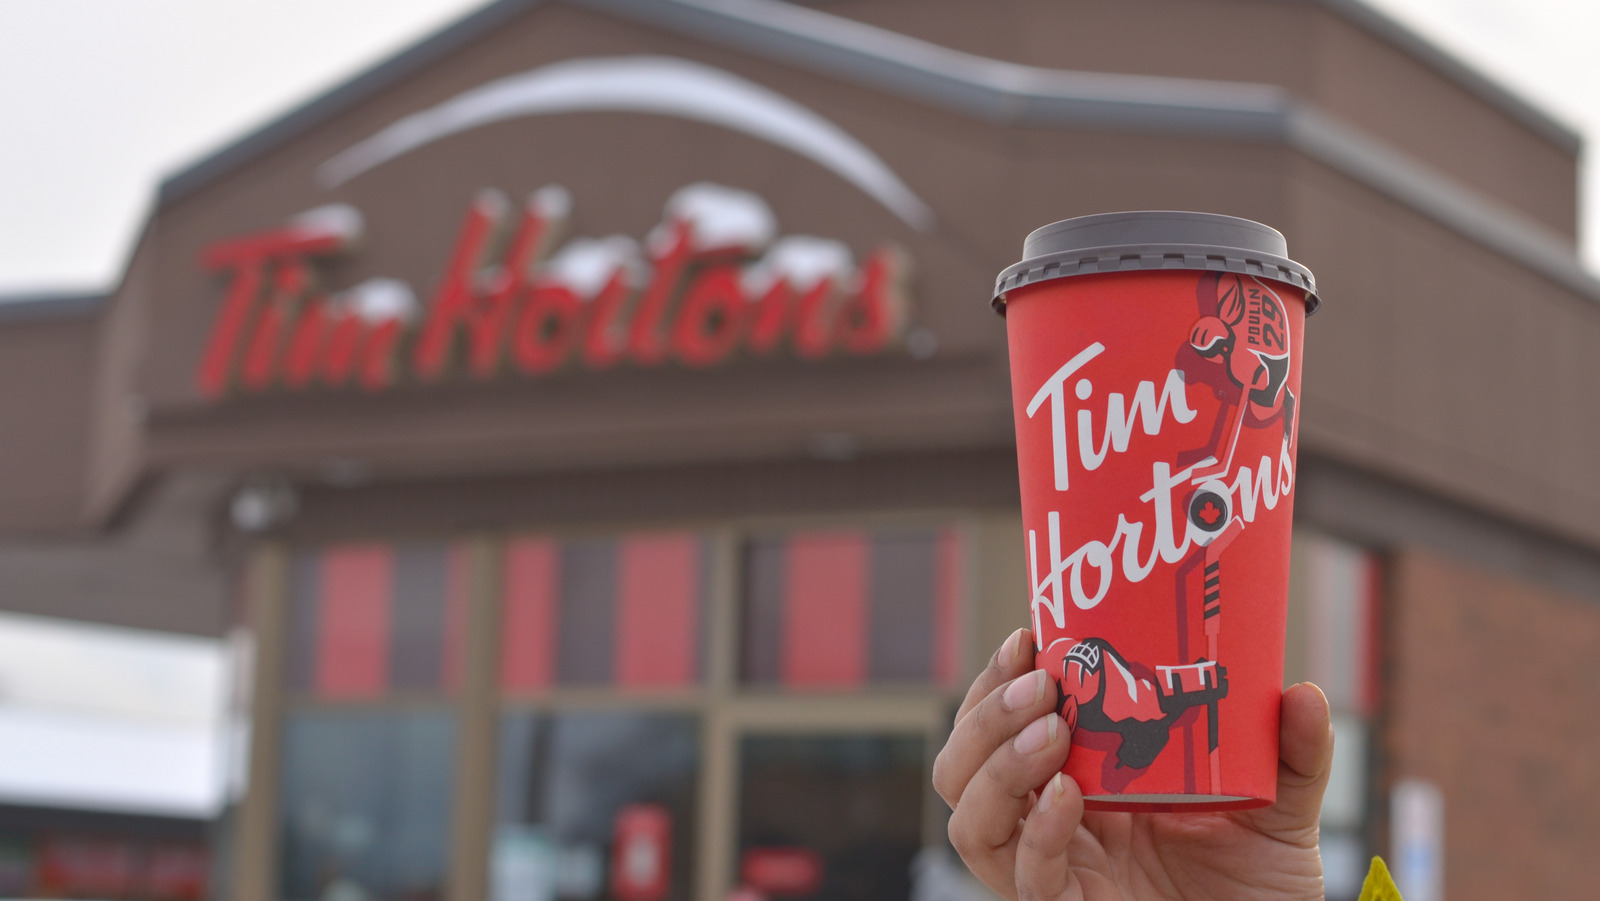 The Real Reason New Tim Hortons Restaurants Look A Lot Different